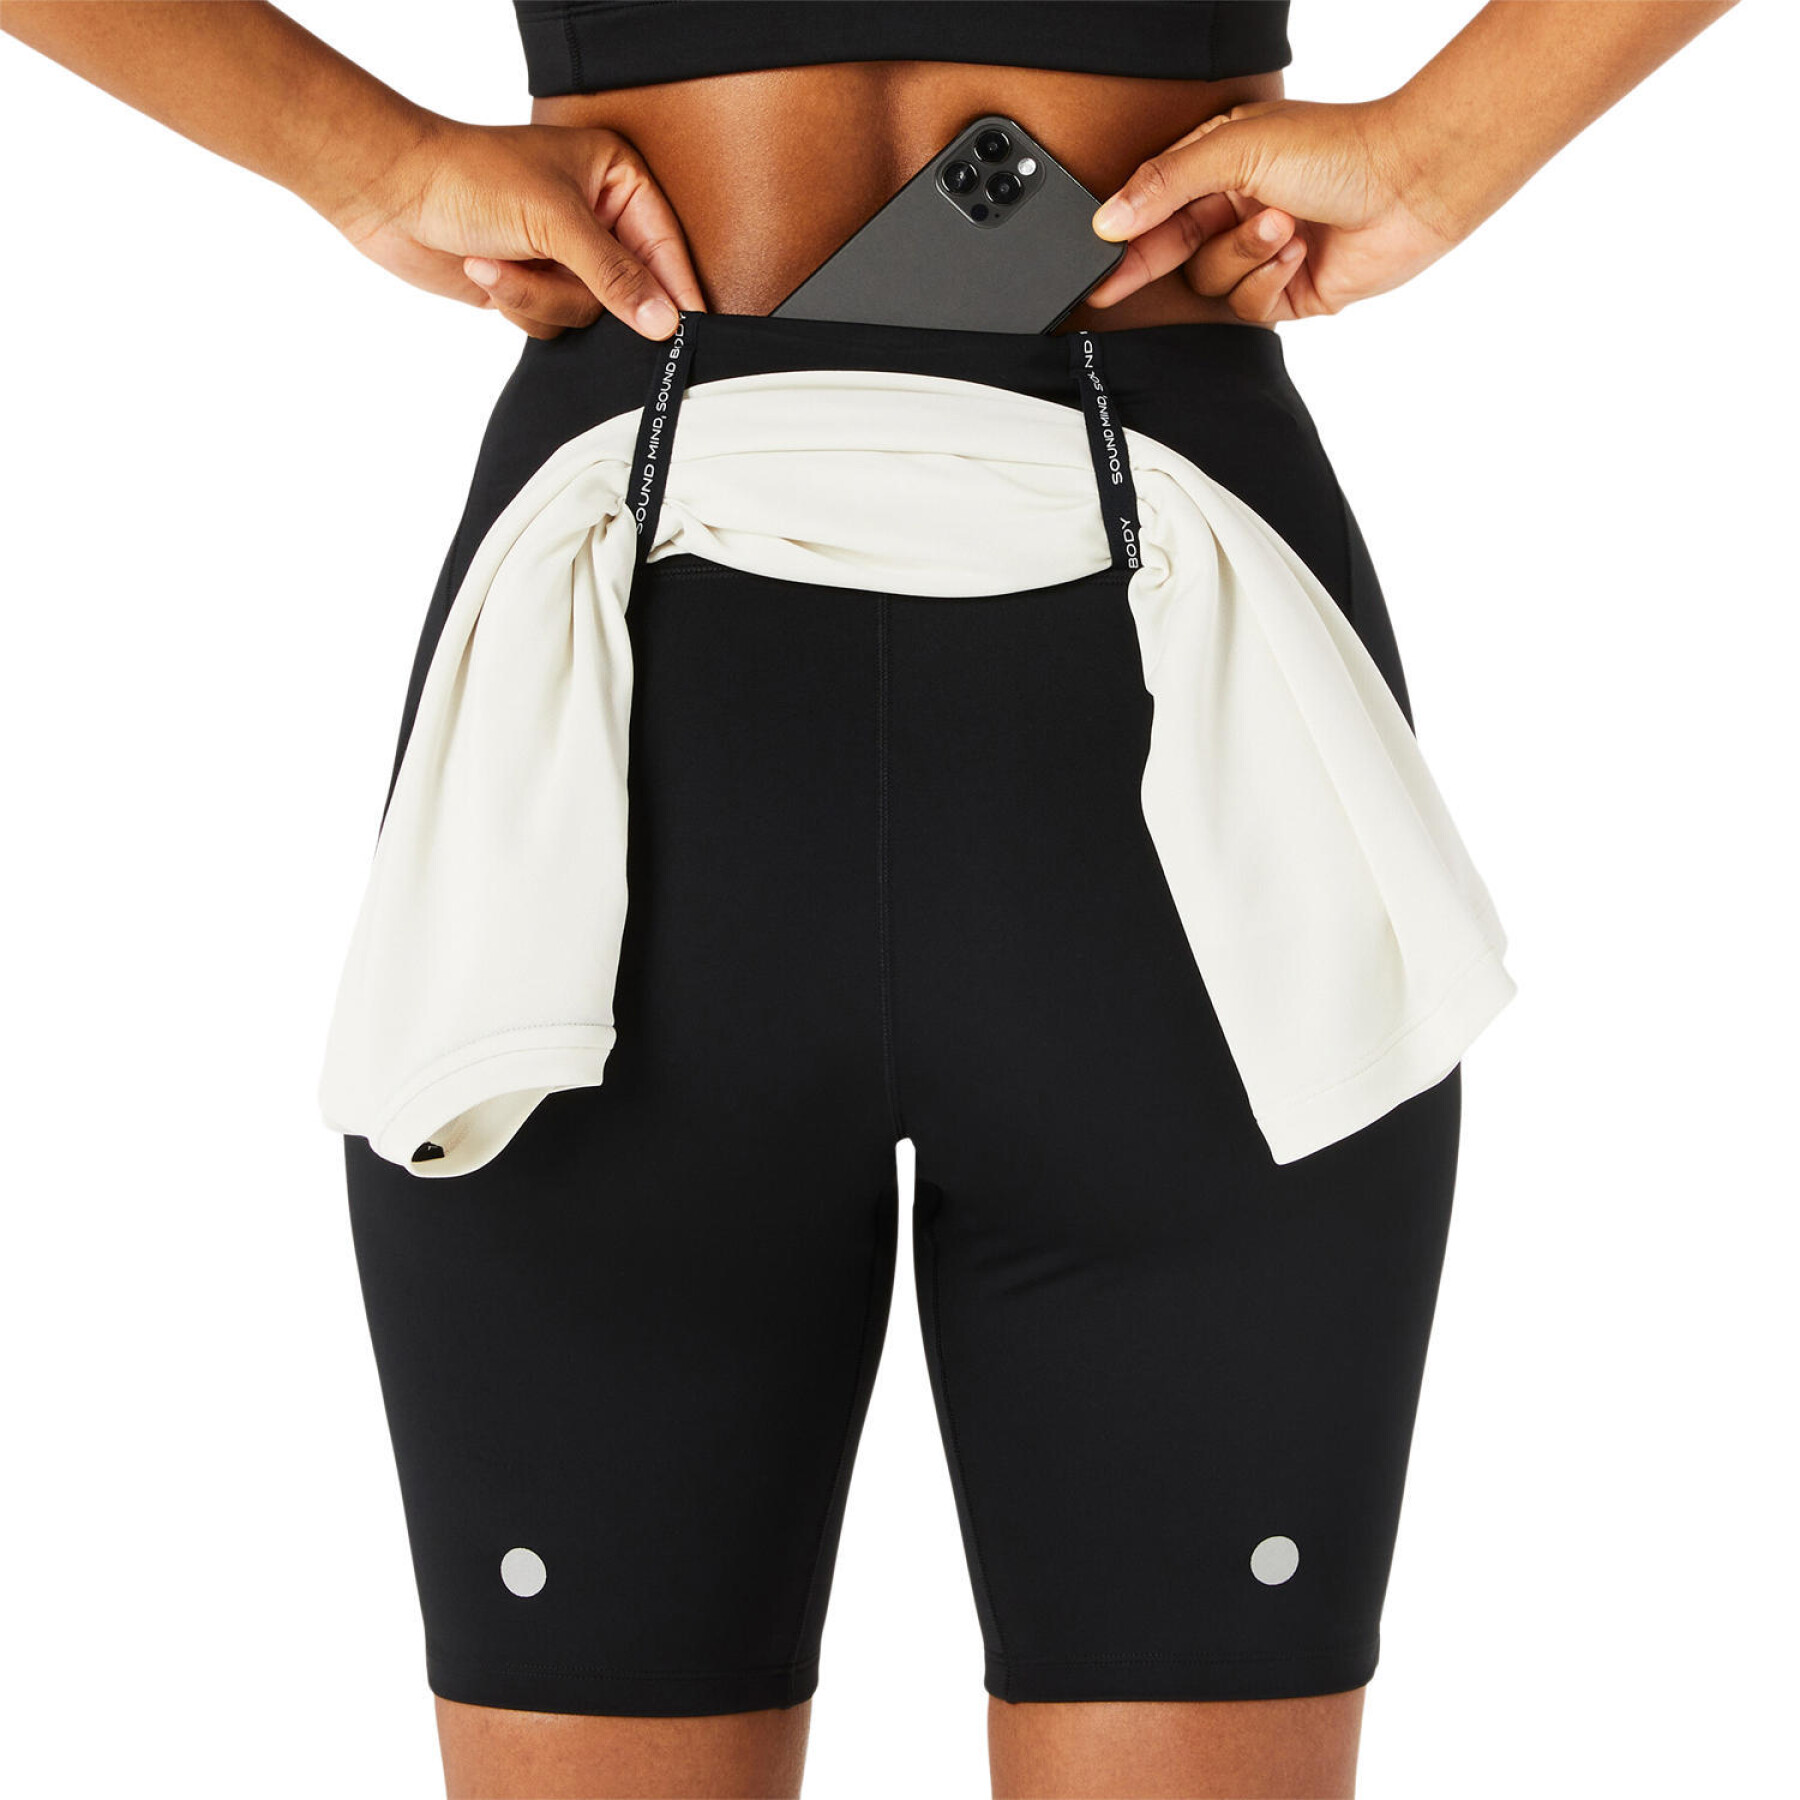 Women's high-waisted shorts Asics Road 8IN Sprinter